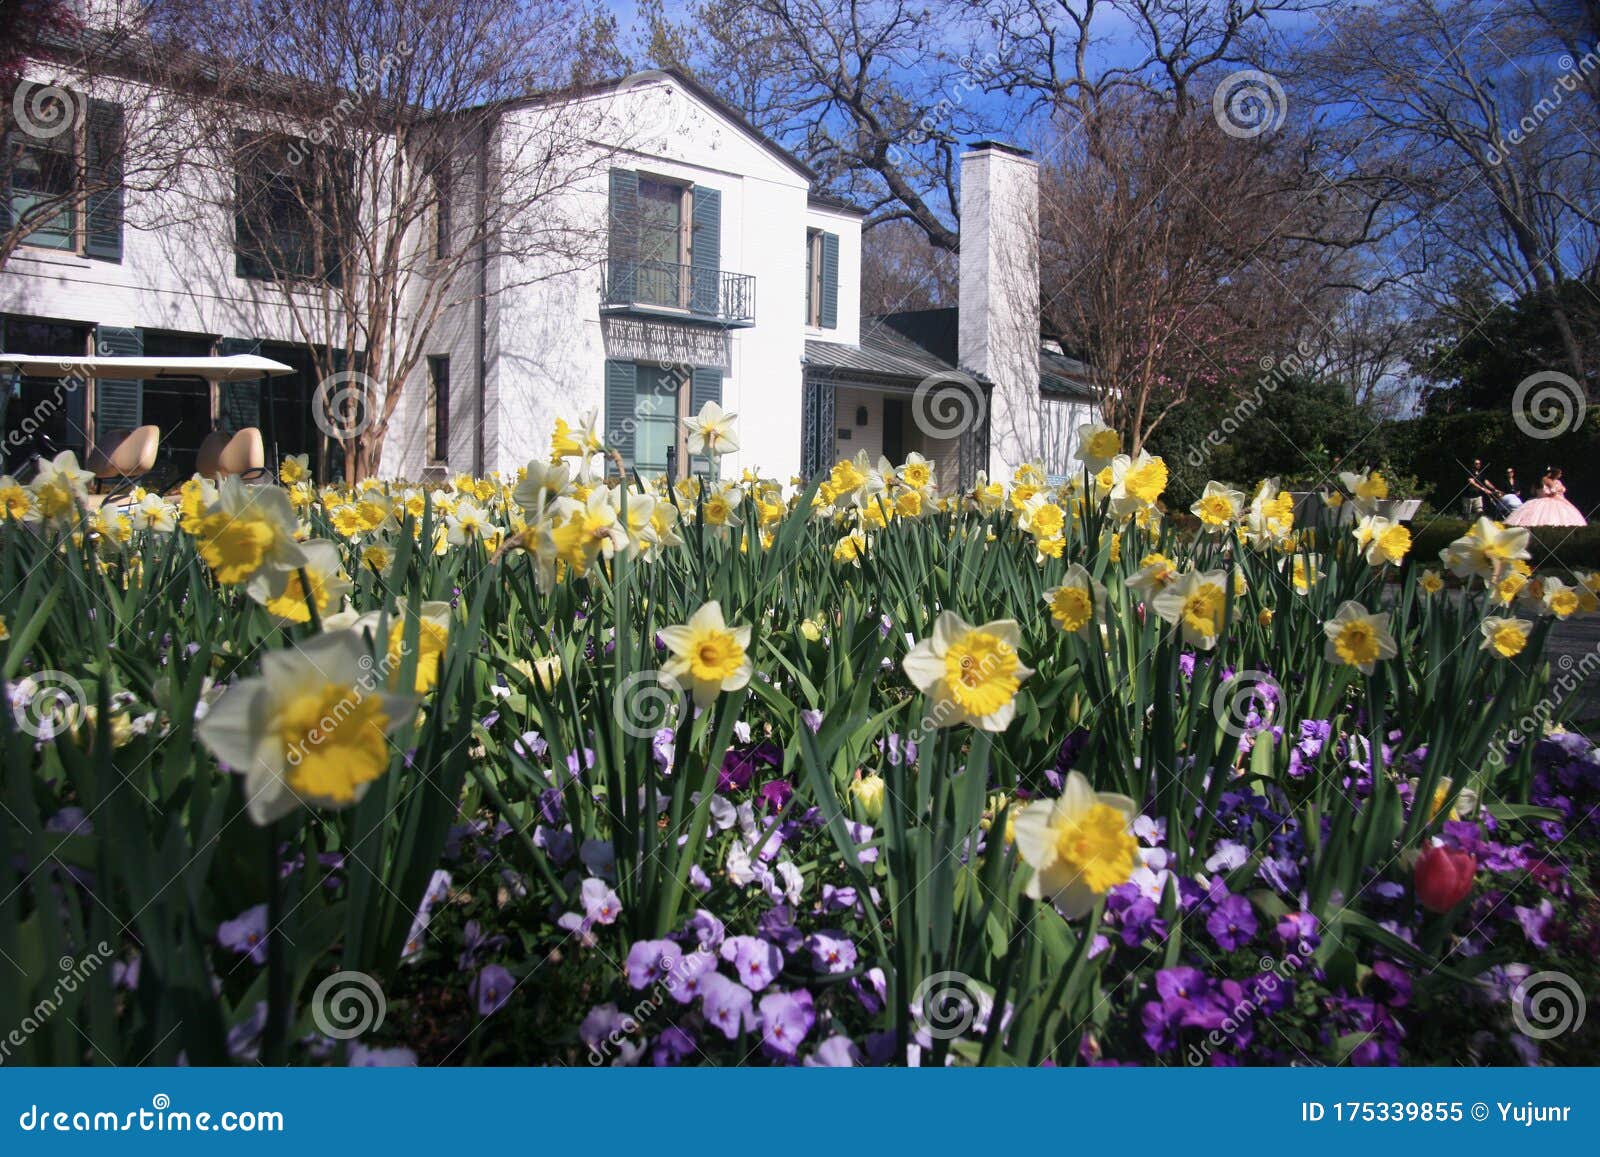 Daffodil Pansies And White Color House Stock Image Image Of